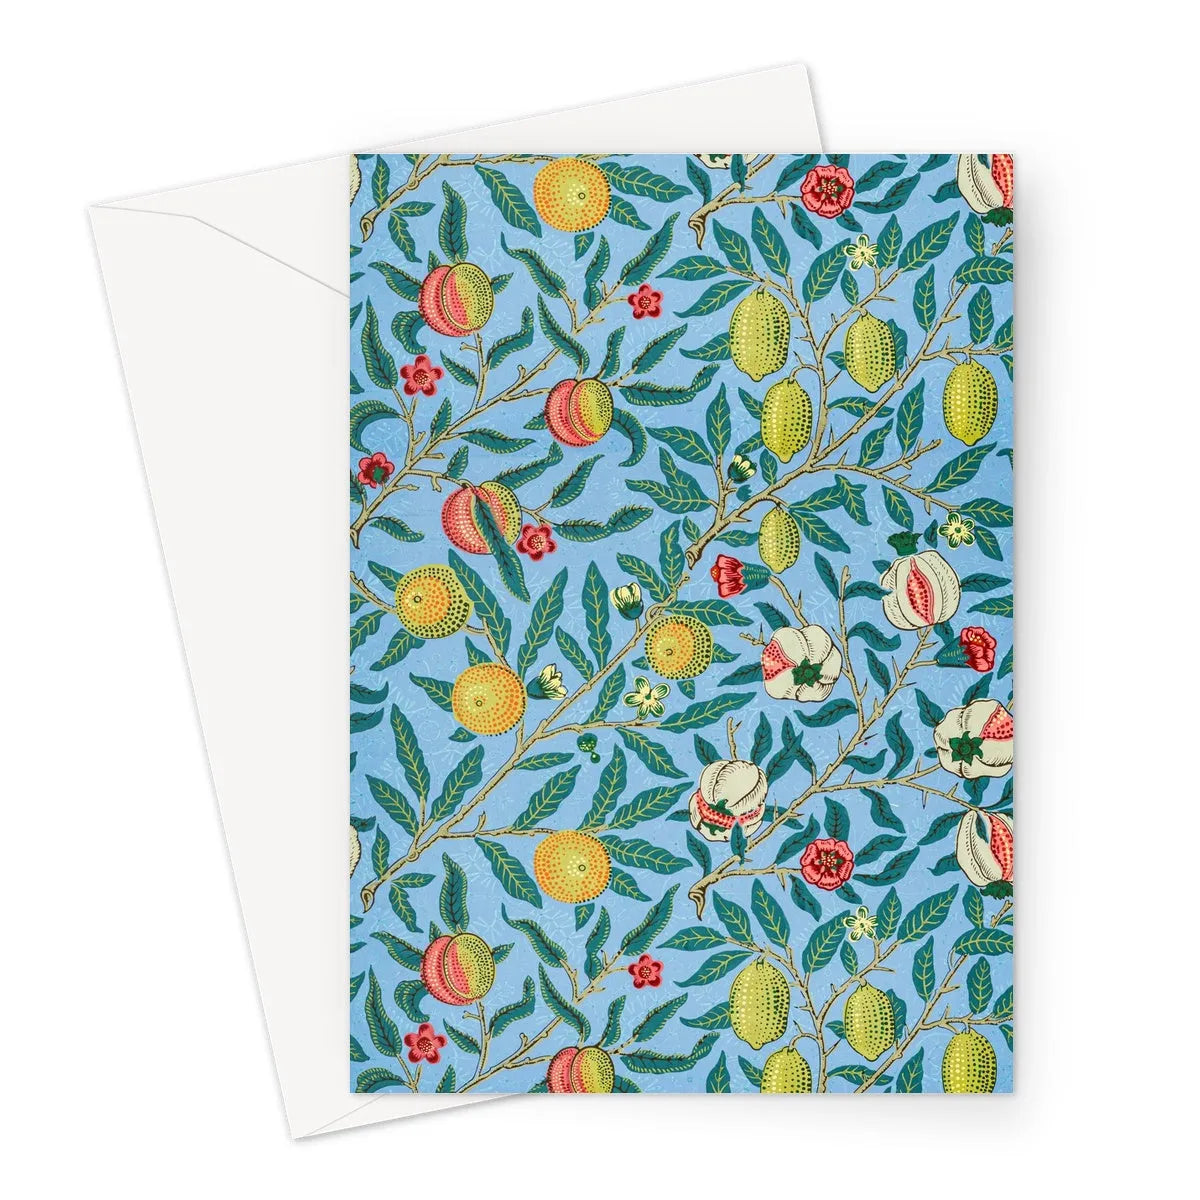 Four Fruits - William Morris Greeting Card - A5 Portrait / 1 Card - Greeting & Note Cards - Aesthetic Art